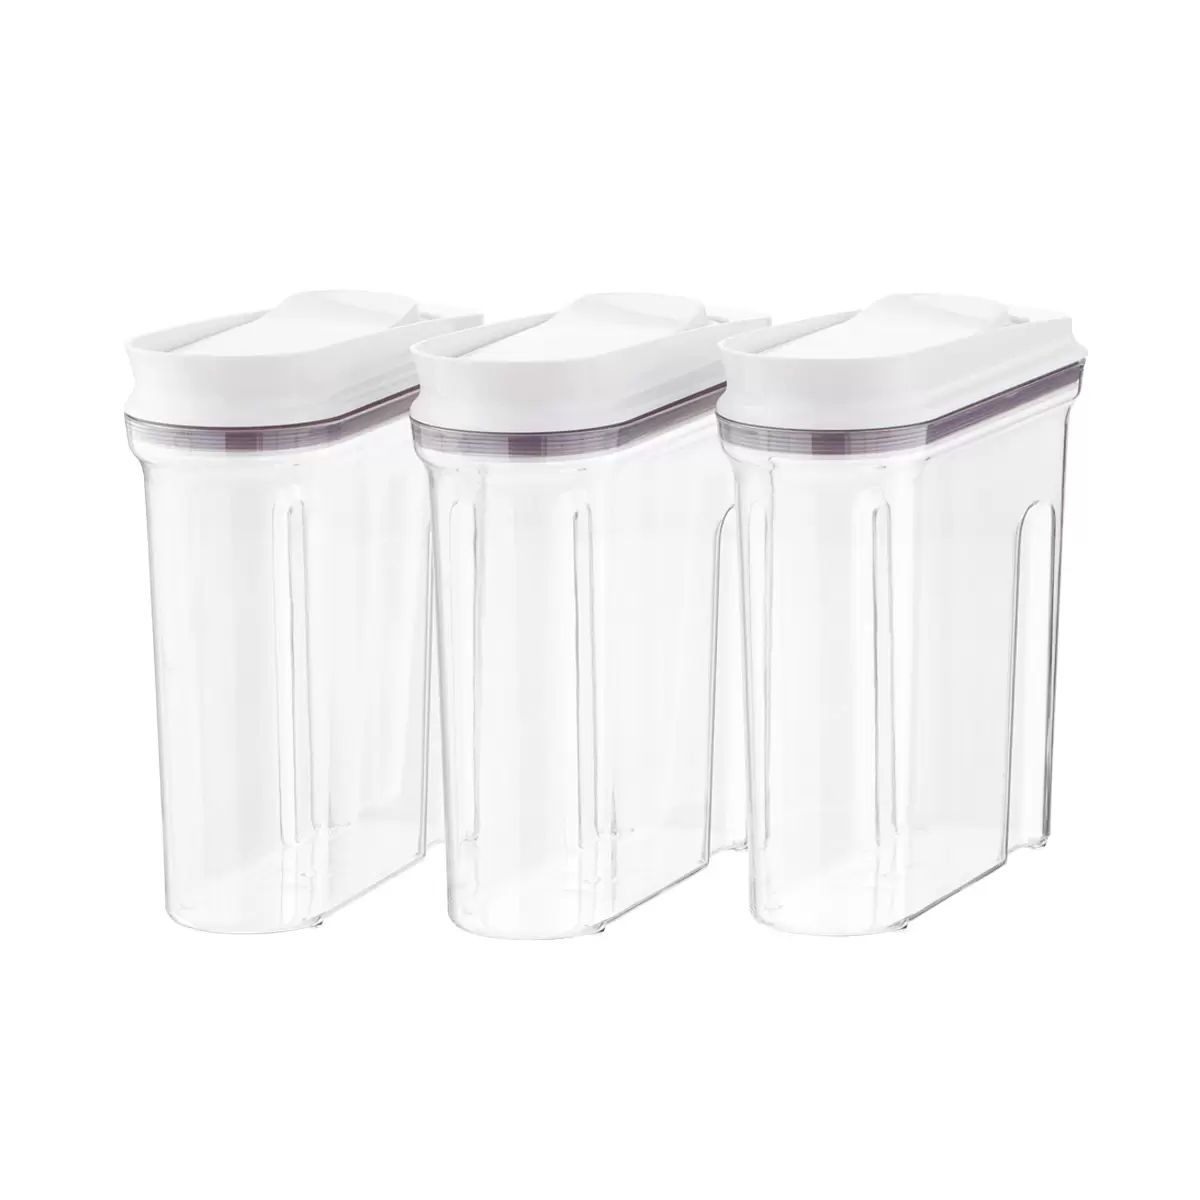 OXO 3.4 qt. Medium POP Cereal Dispenser Set of 3 | The Container Store